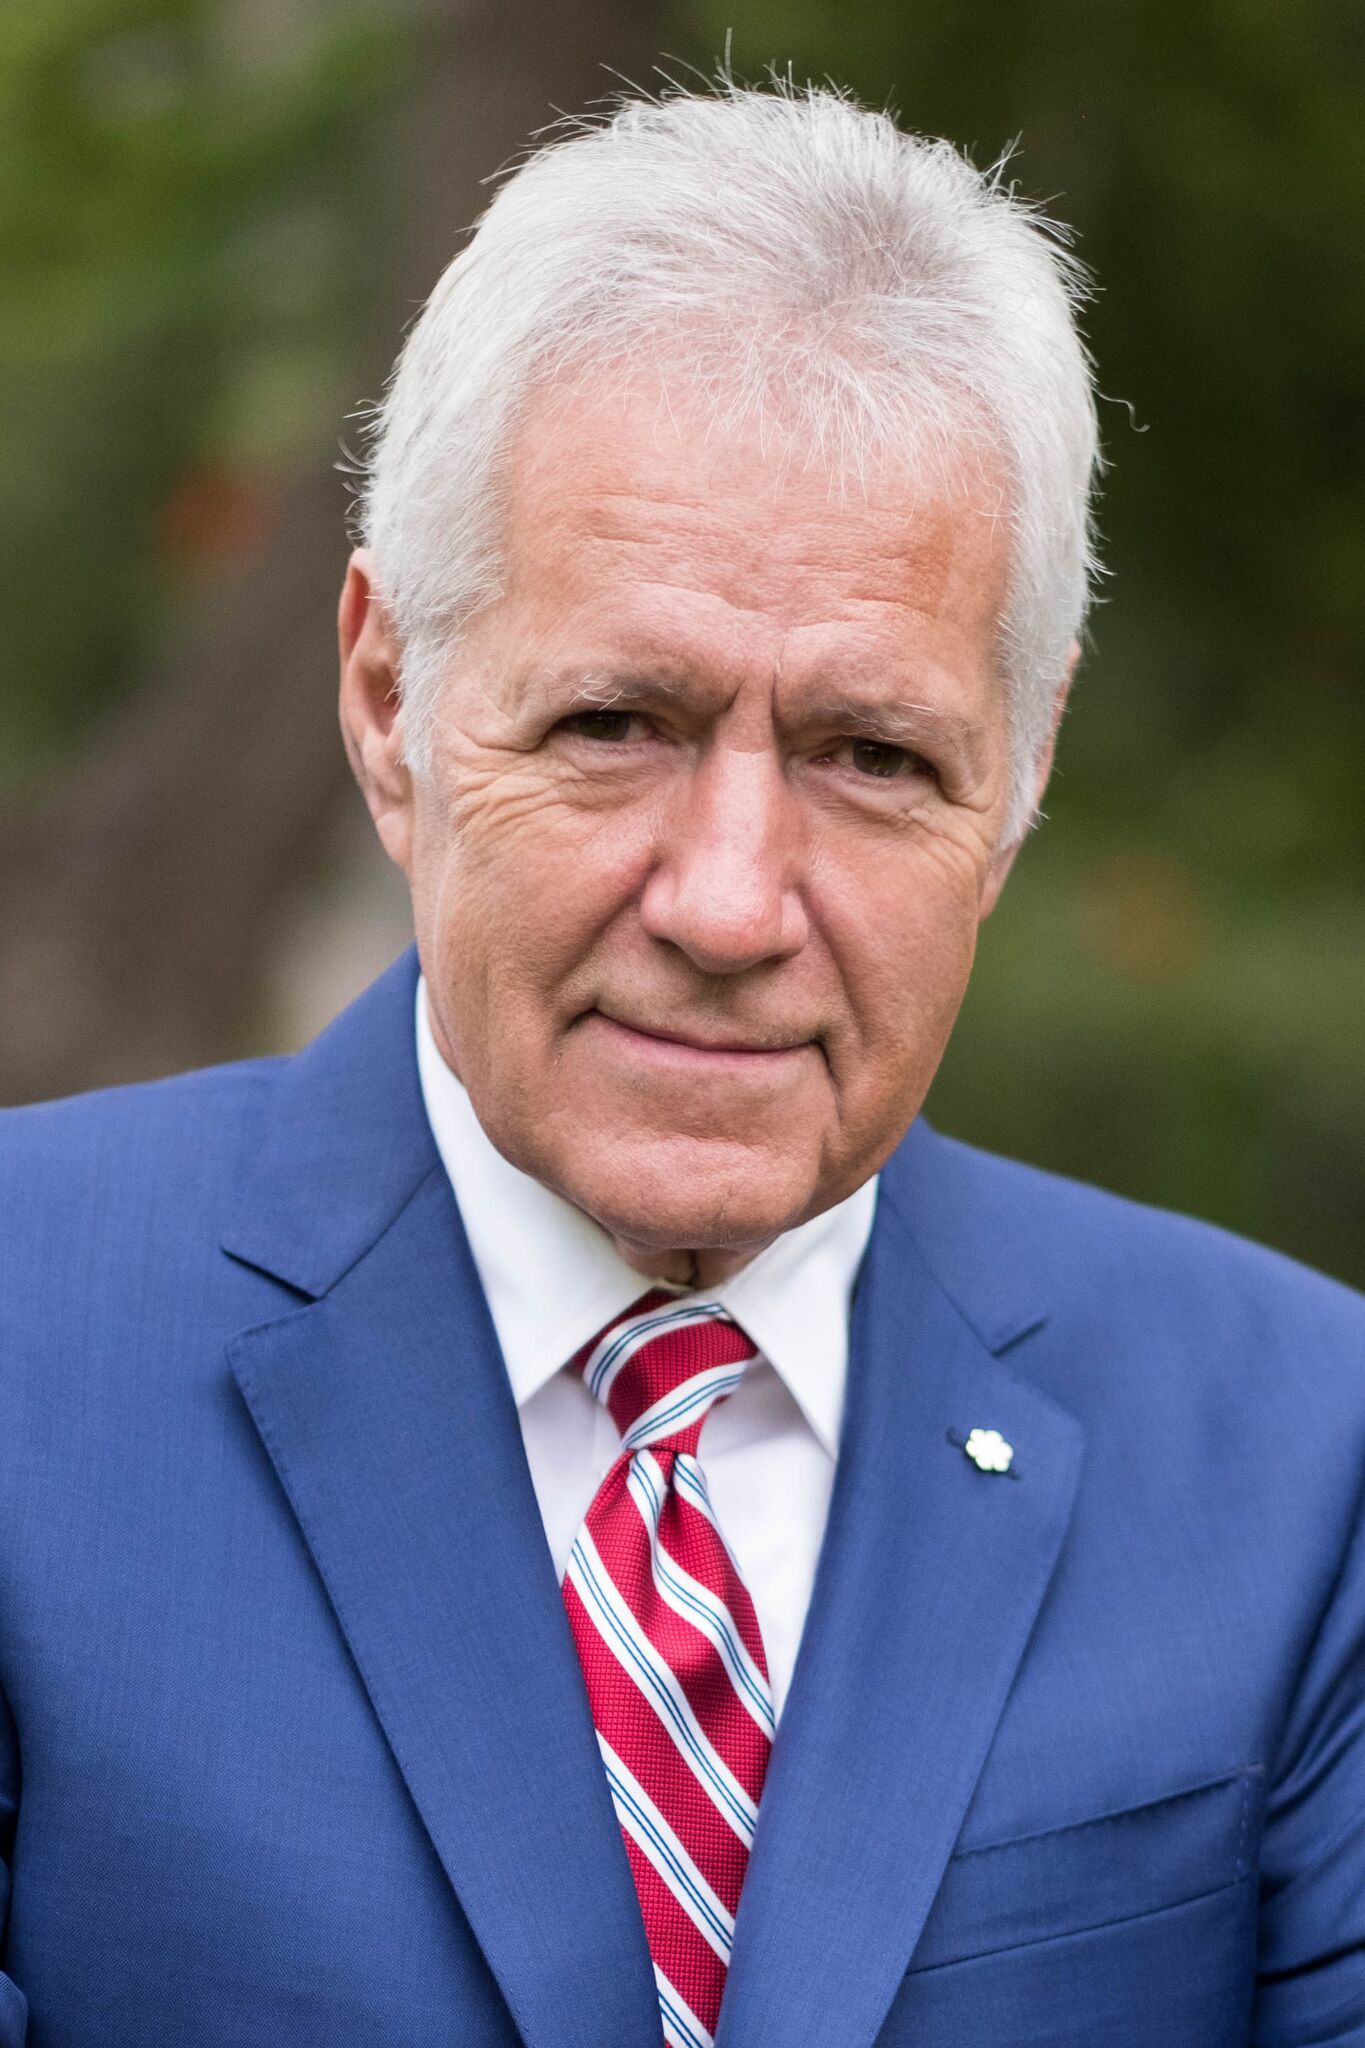 TV personality Alex Trebek attends the 150th anniversary of Canada's Confederation at the Official Residence of Canada | Photo: Getty Images